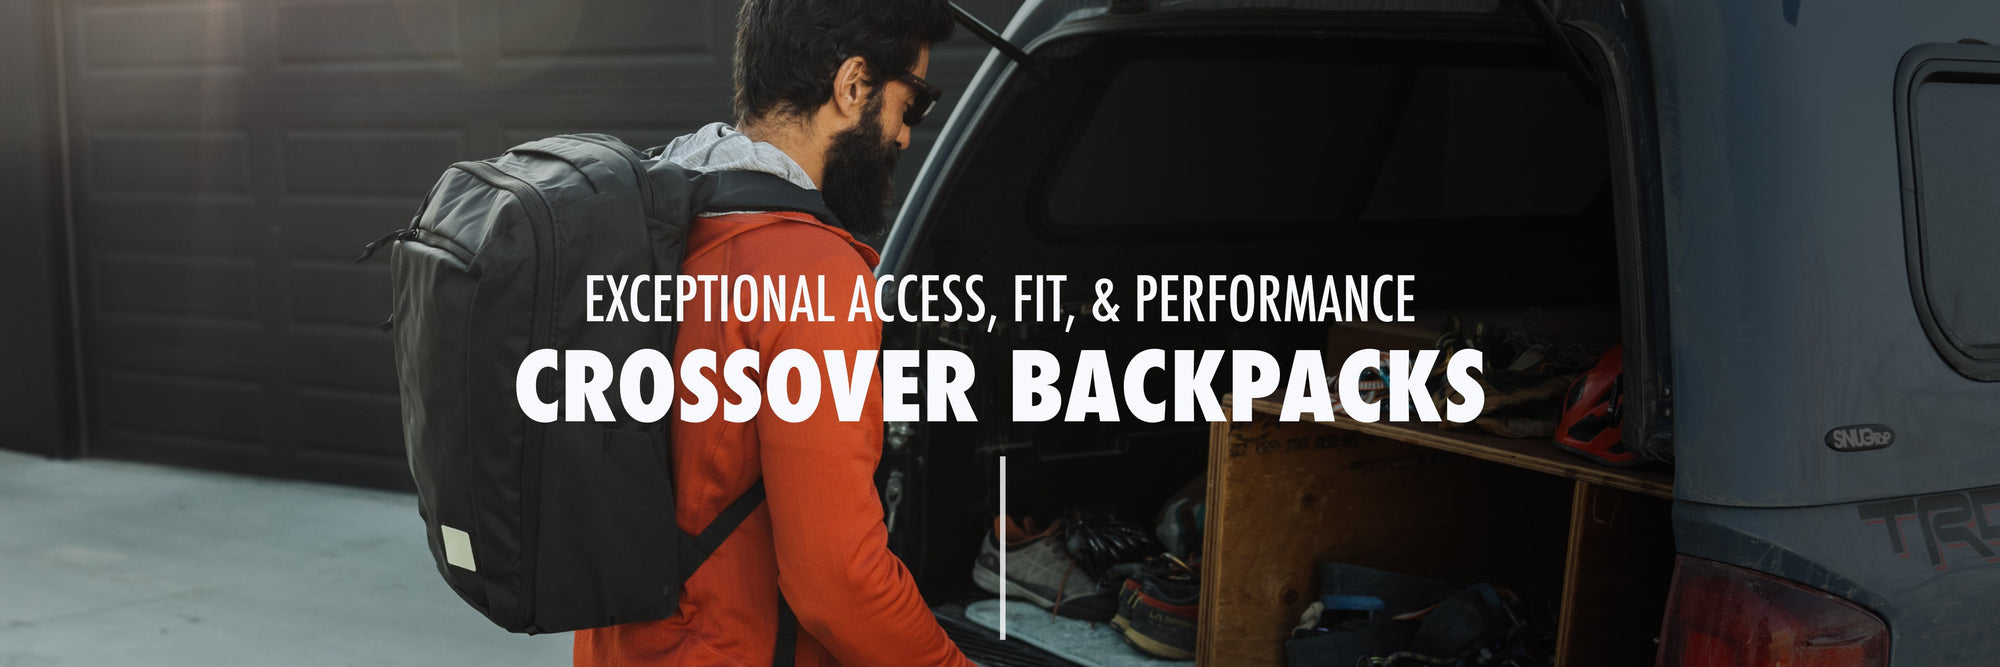 MEET OUR CROSSOVER BACKPACKS